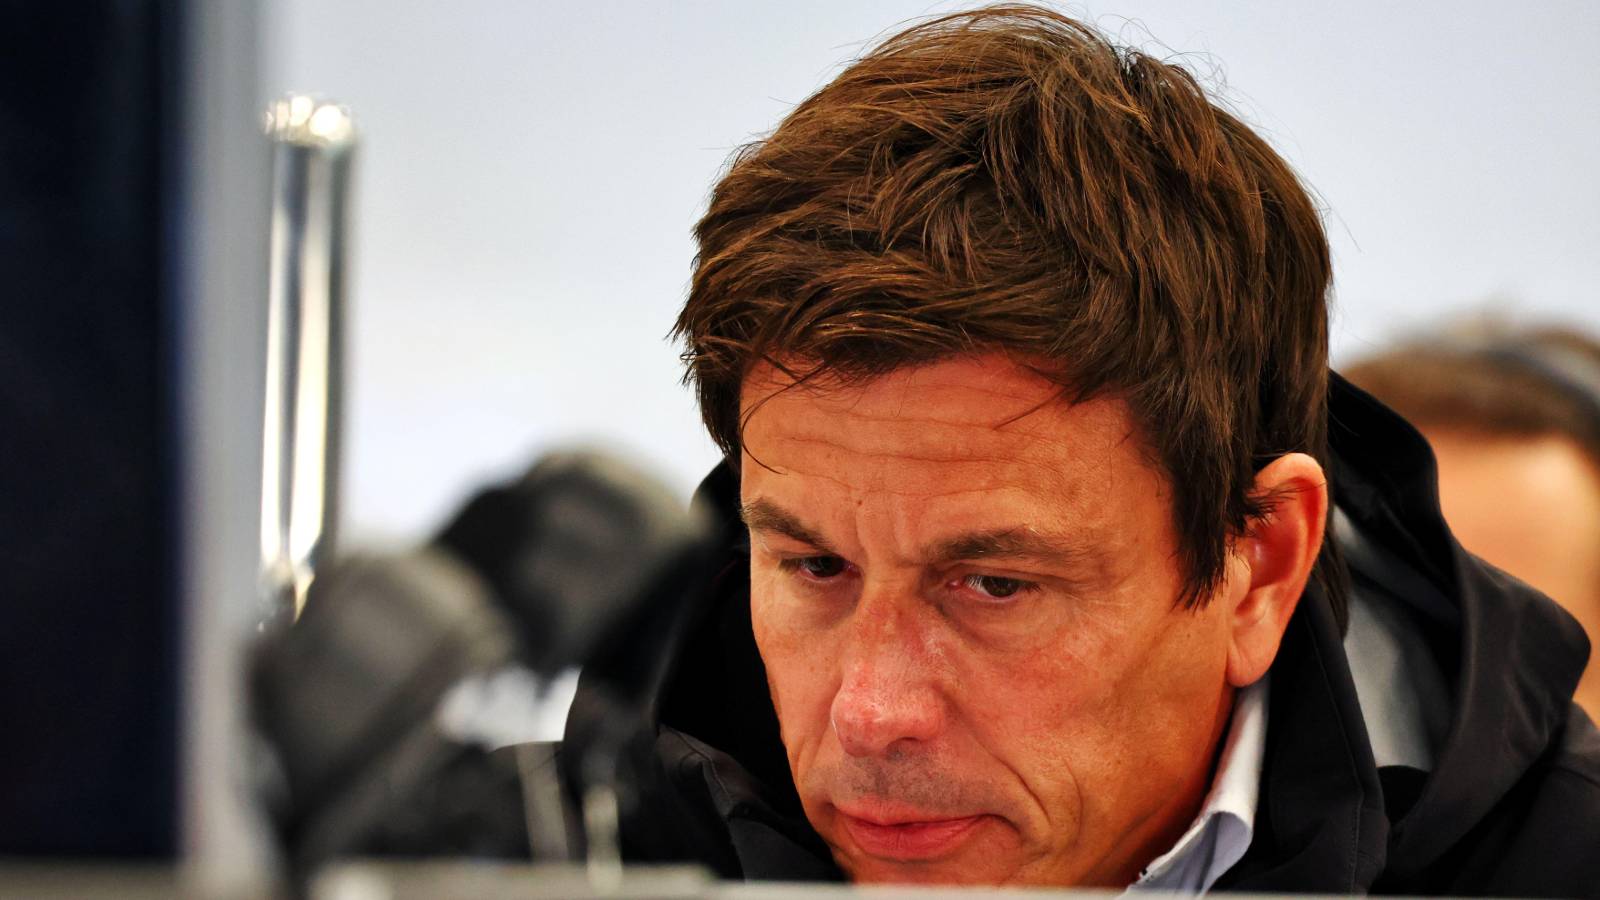 Toto Wolff looking downcast. Spa-Francorchamps August 2022.